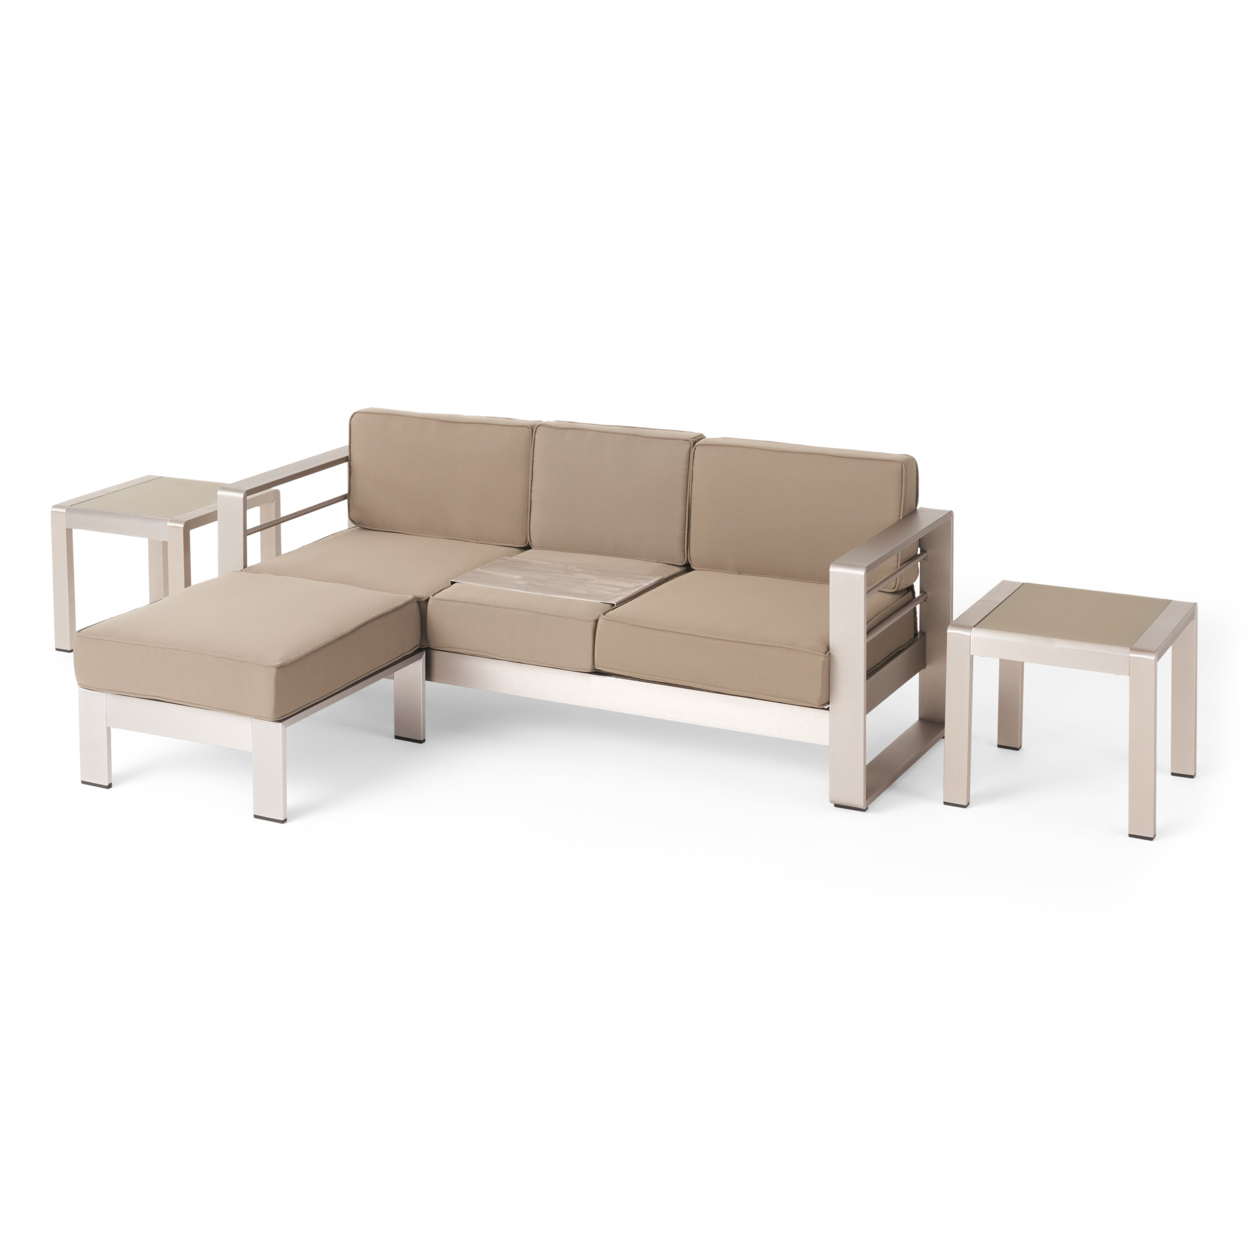 Stacy Outdoor 3 Seater Aluminum Sofa And Ottoman Set With Side Tables